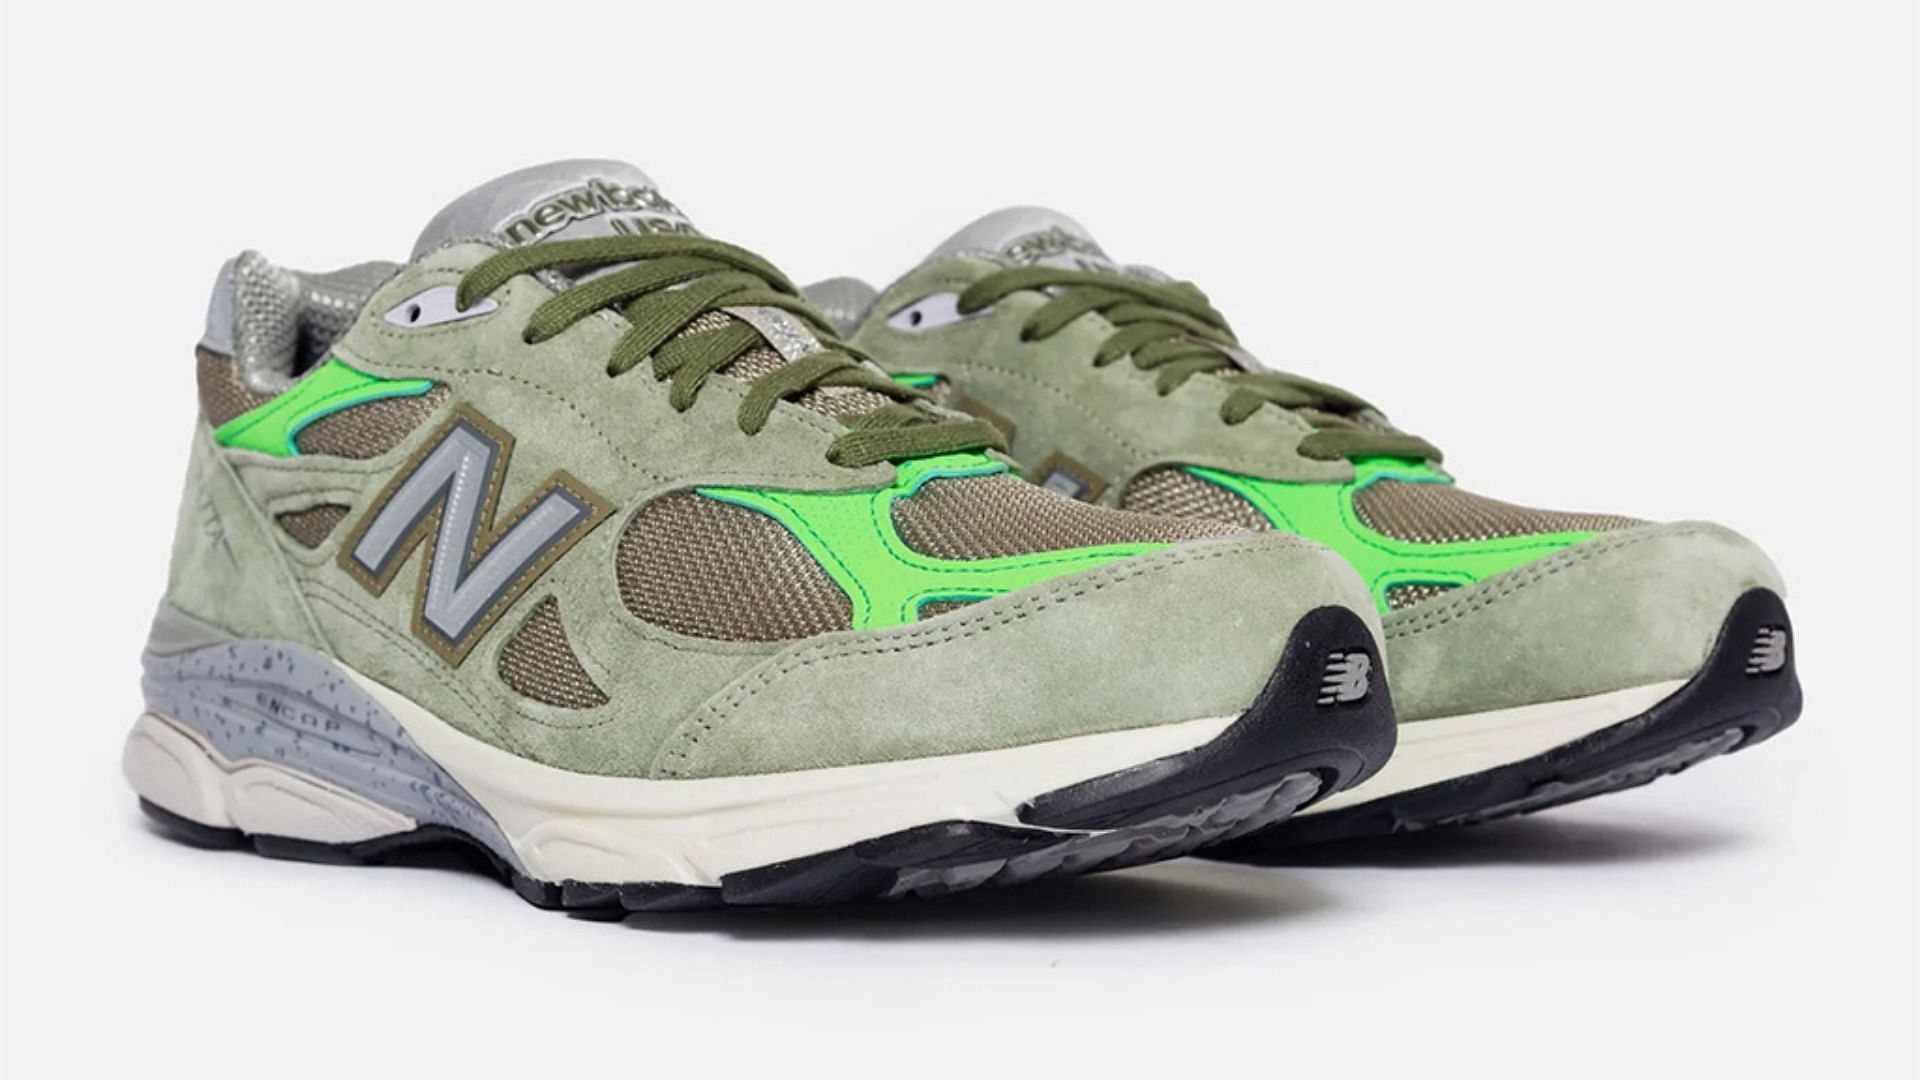 Take a closer look at the impending New Balance 990v3 sneakers (Image via Patta)